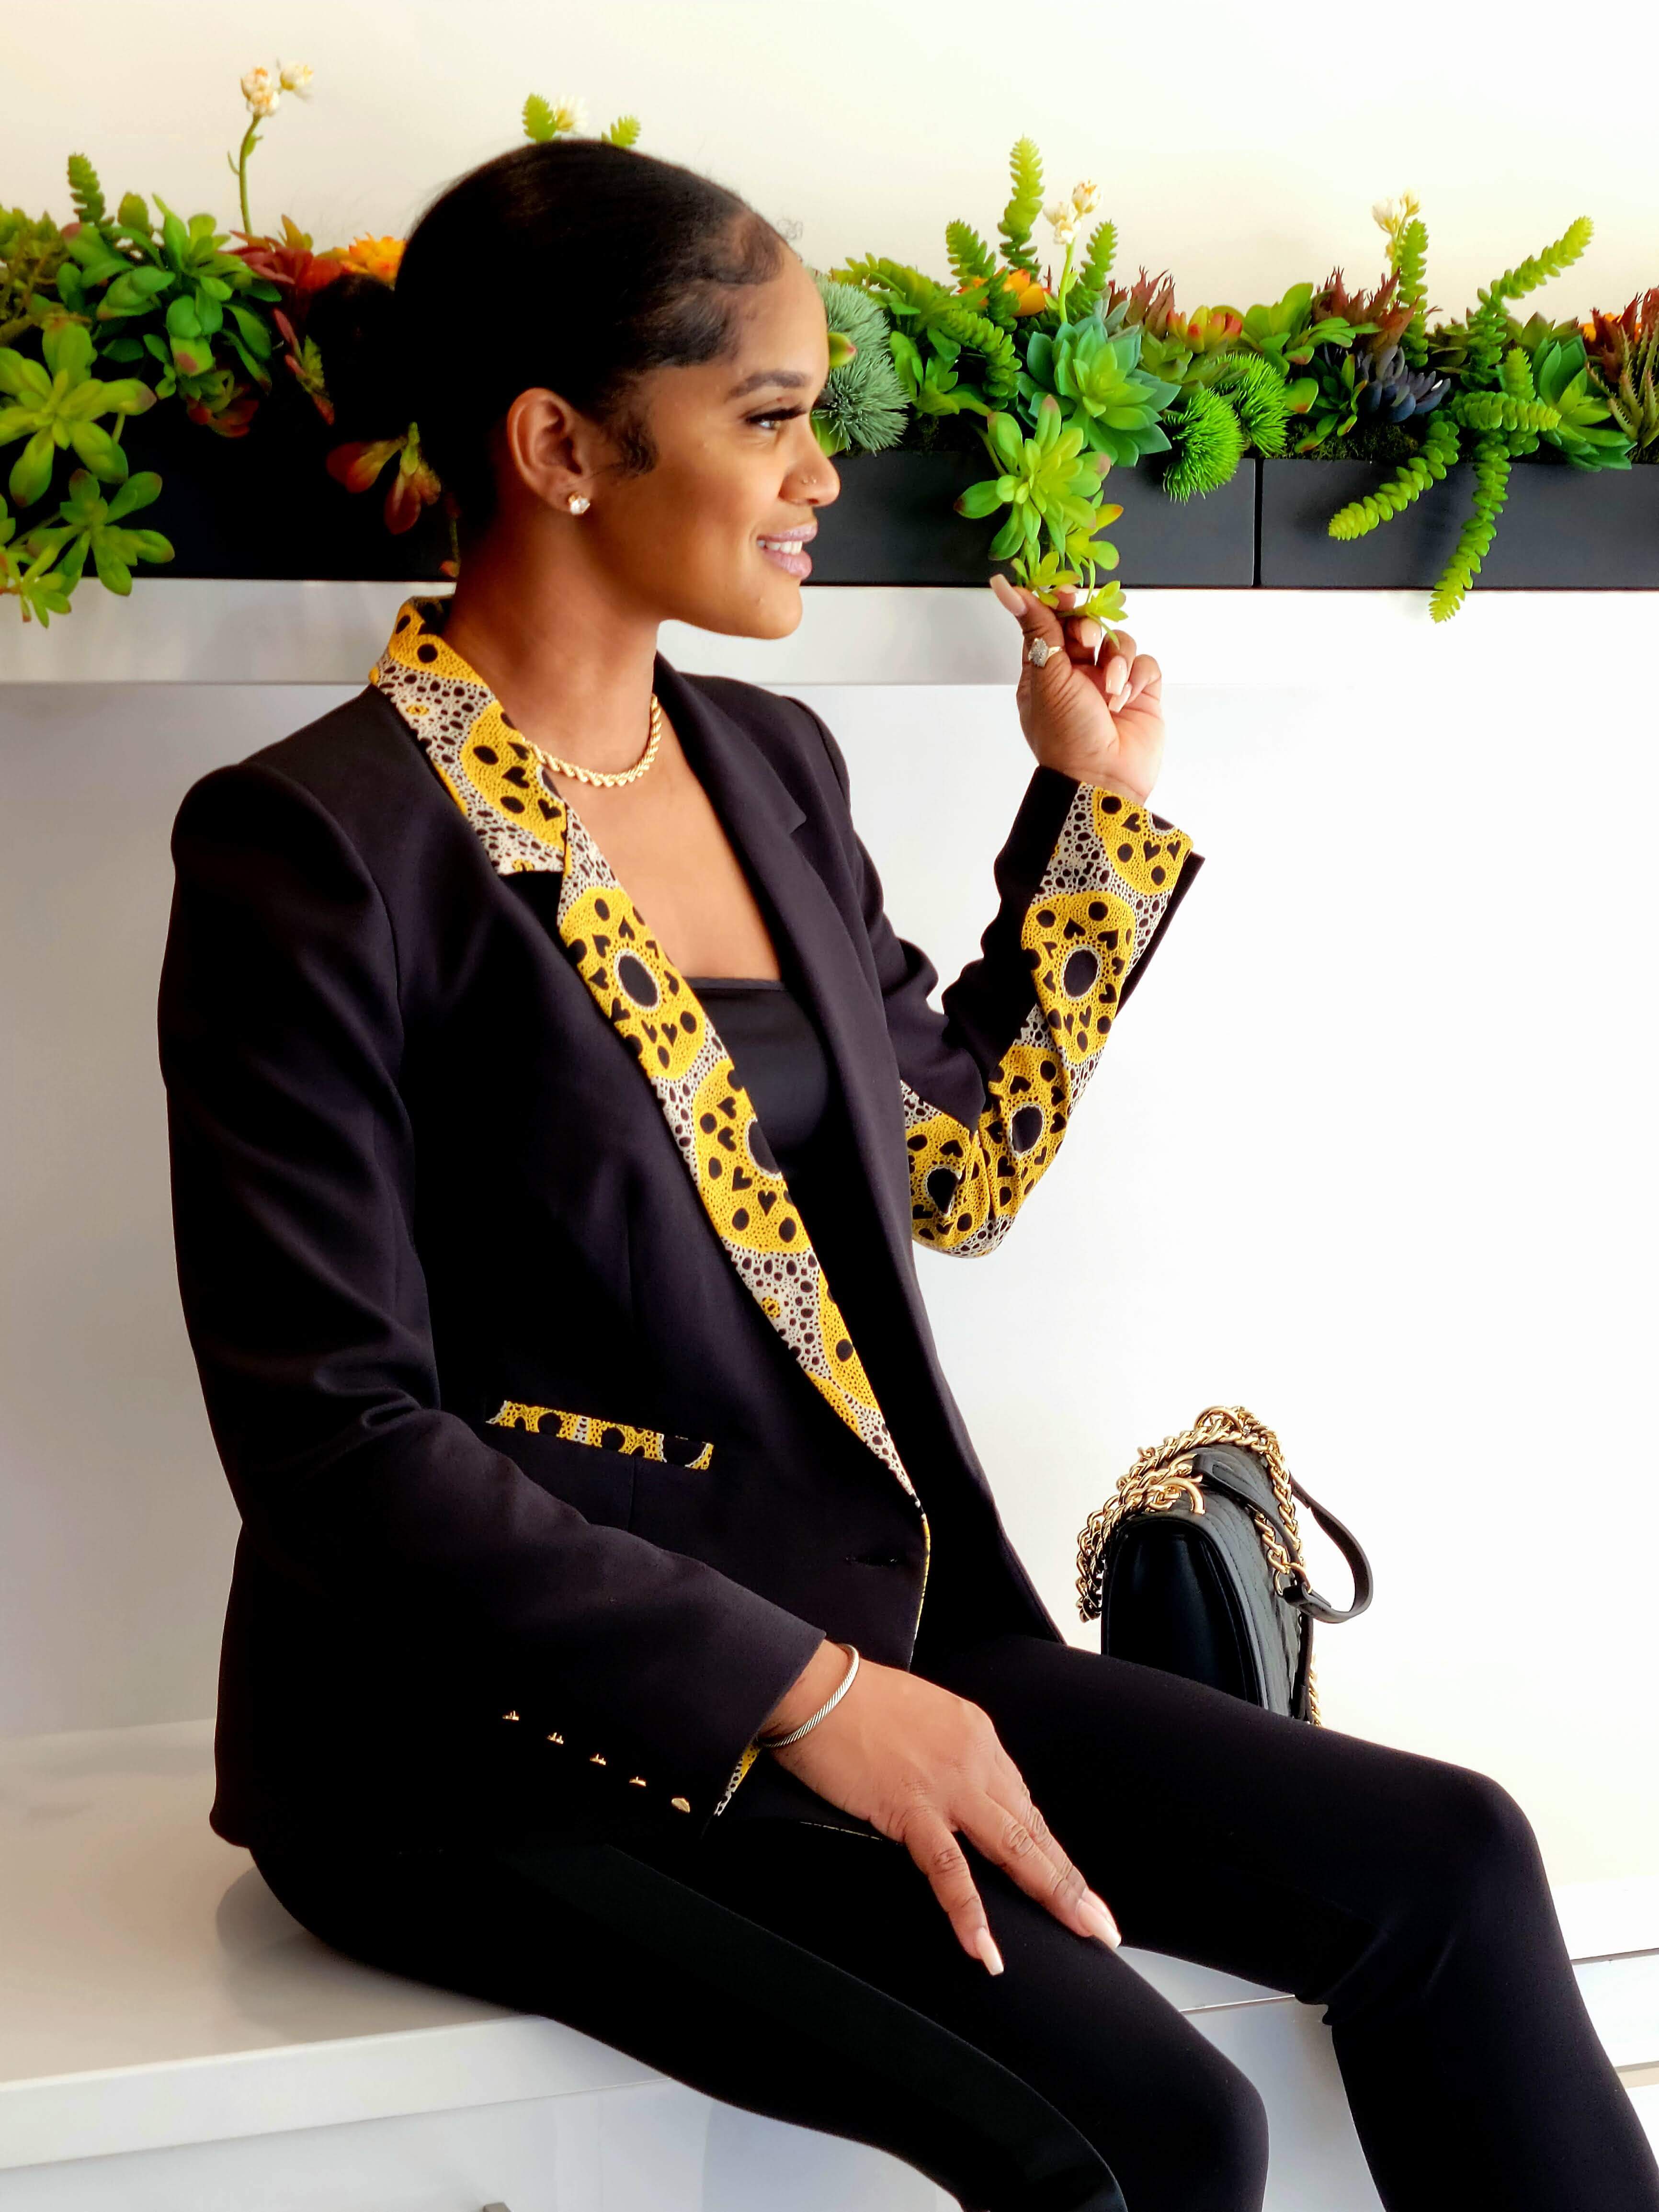 Yeli Bana Women’s Double Breasted Blazer (in Black & Yellow) Pair well with fitted attire.